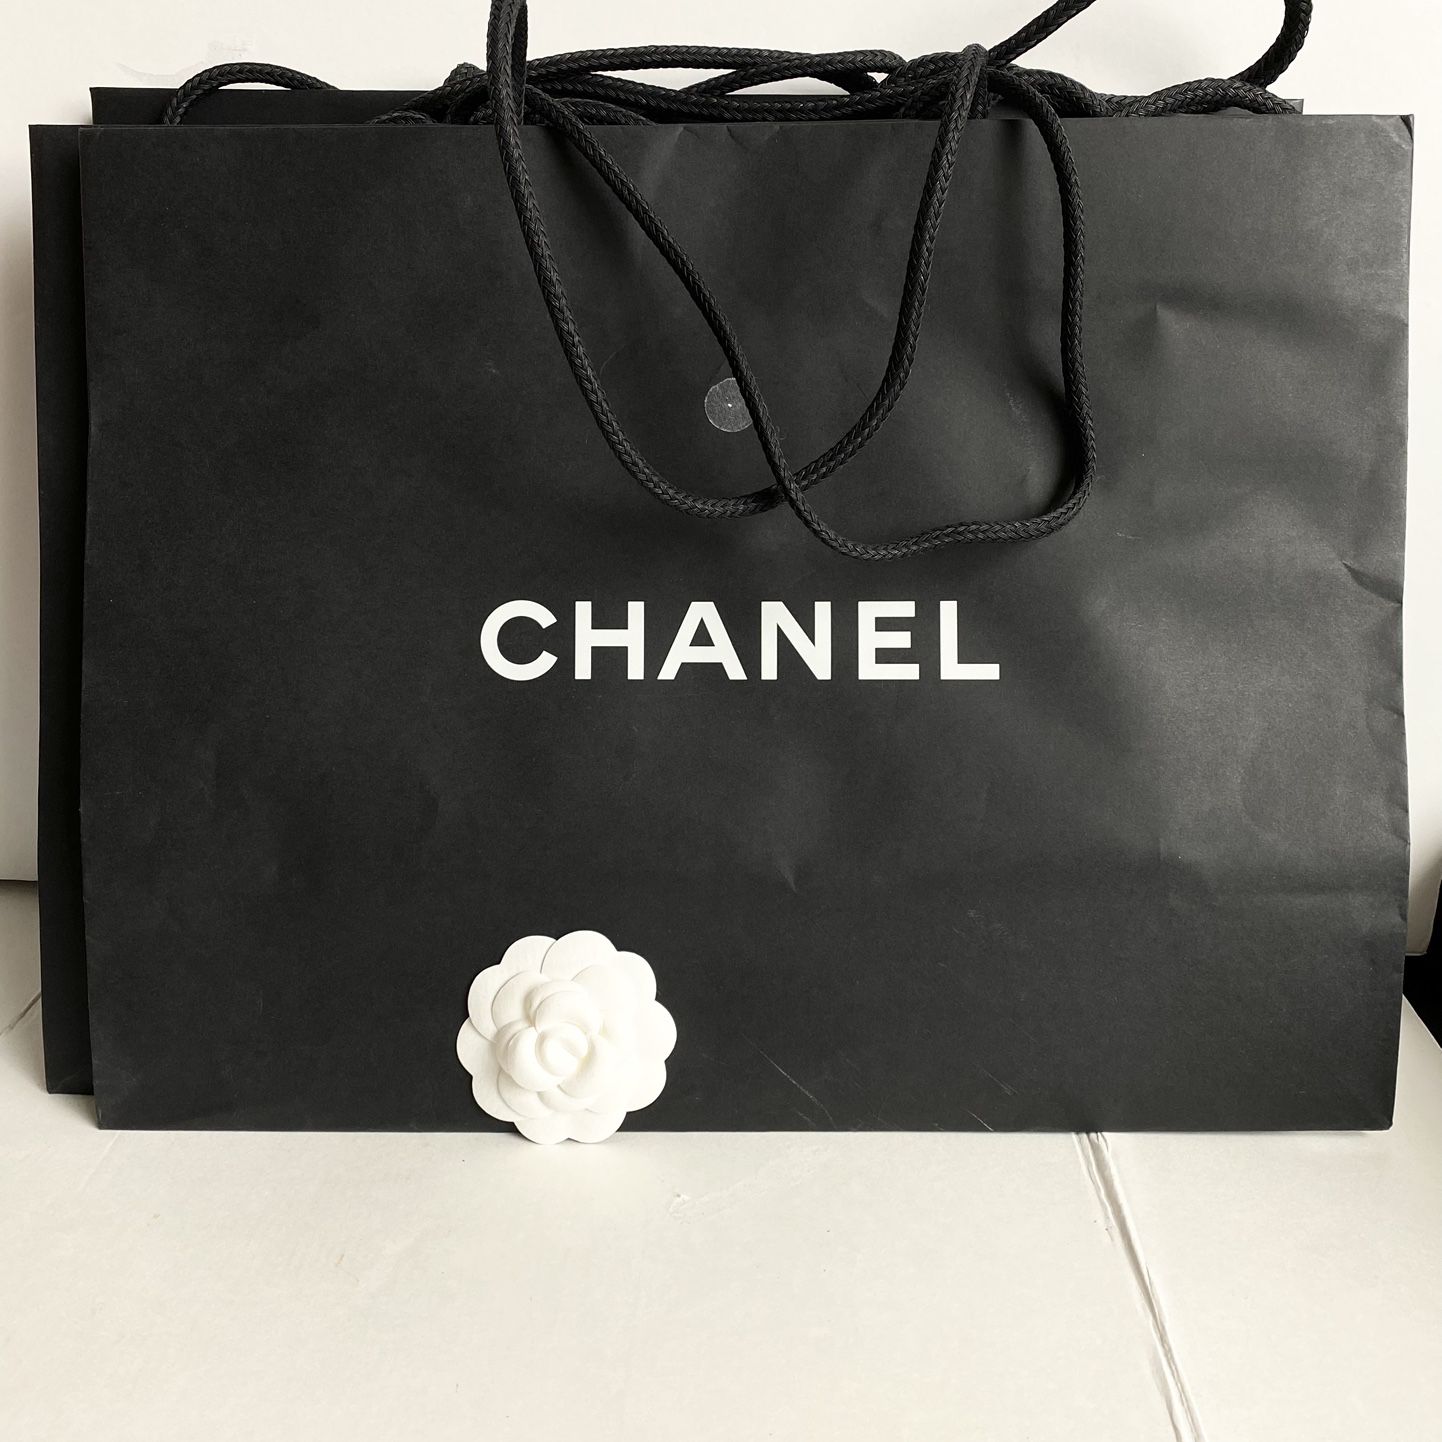 Chanel Gift Bag Empty for Sale in City Of Industry, CA - OfferUp